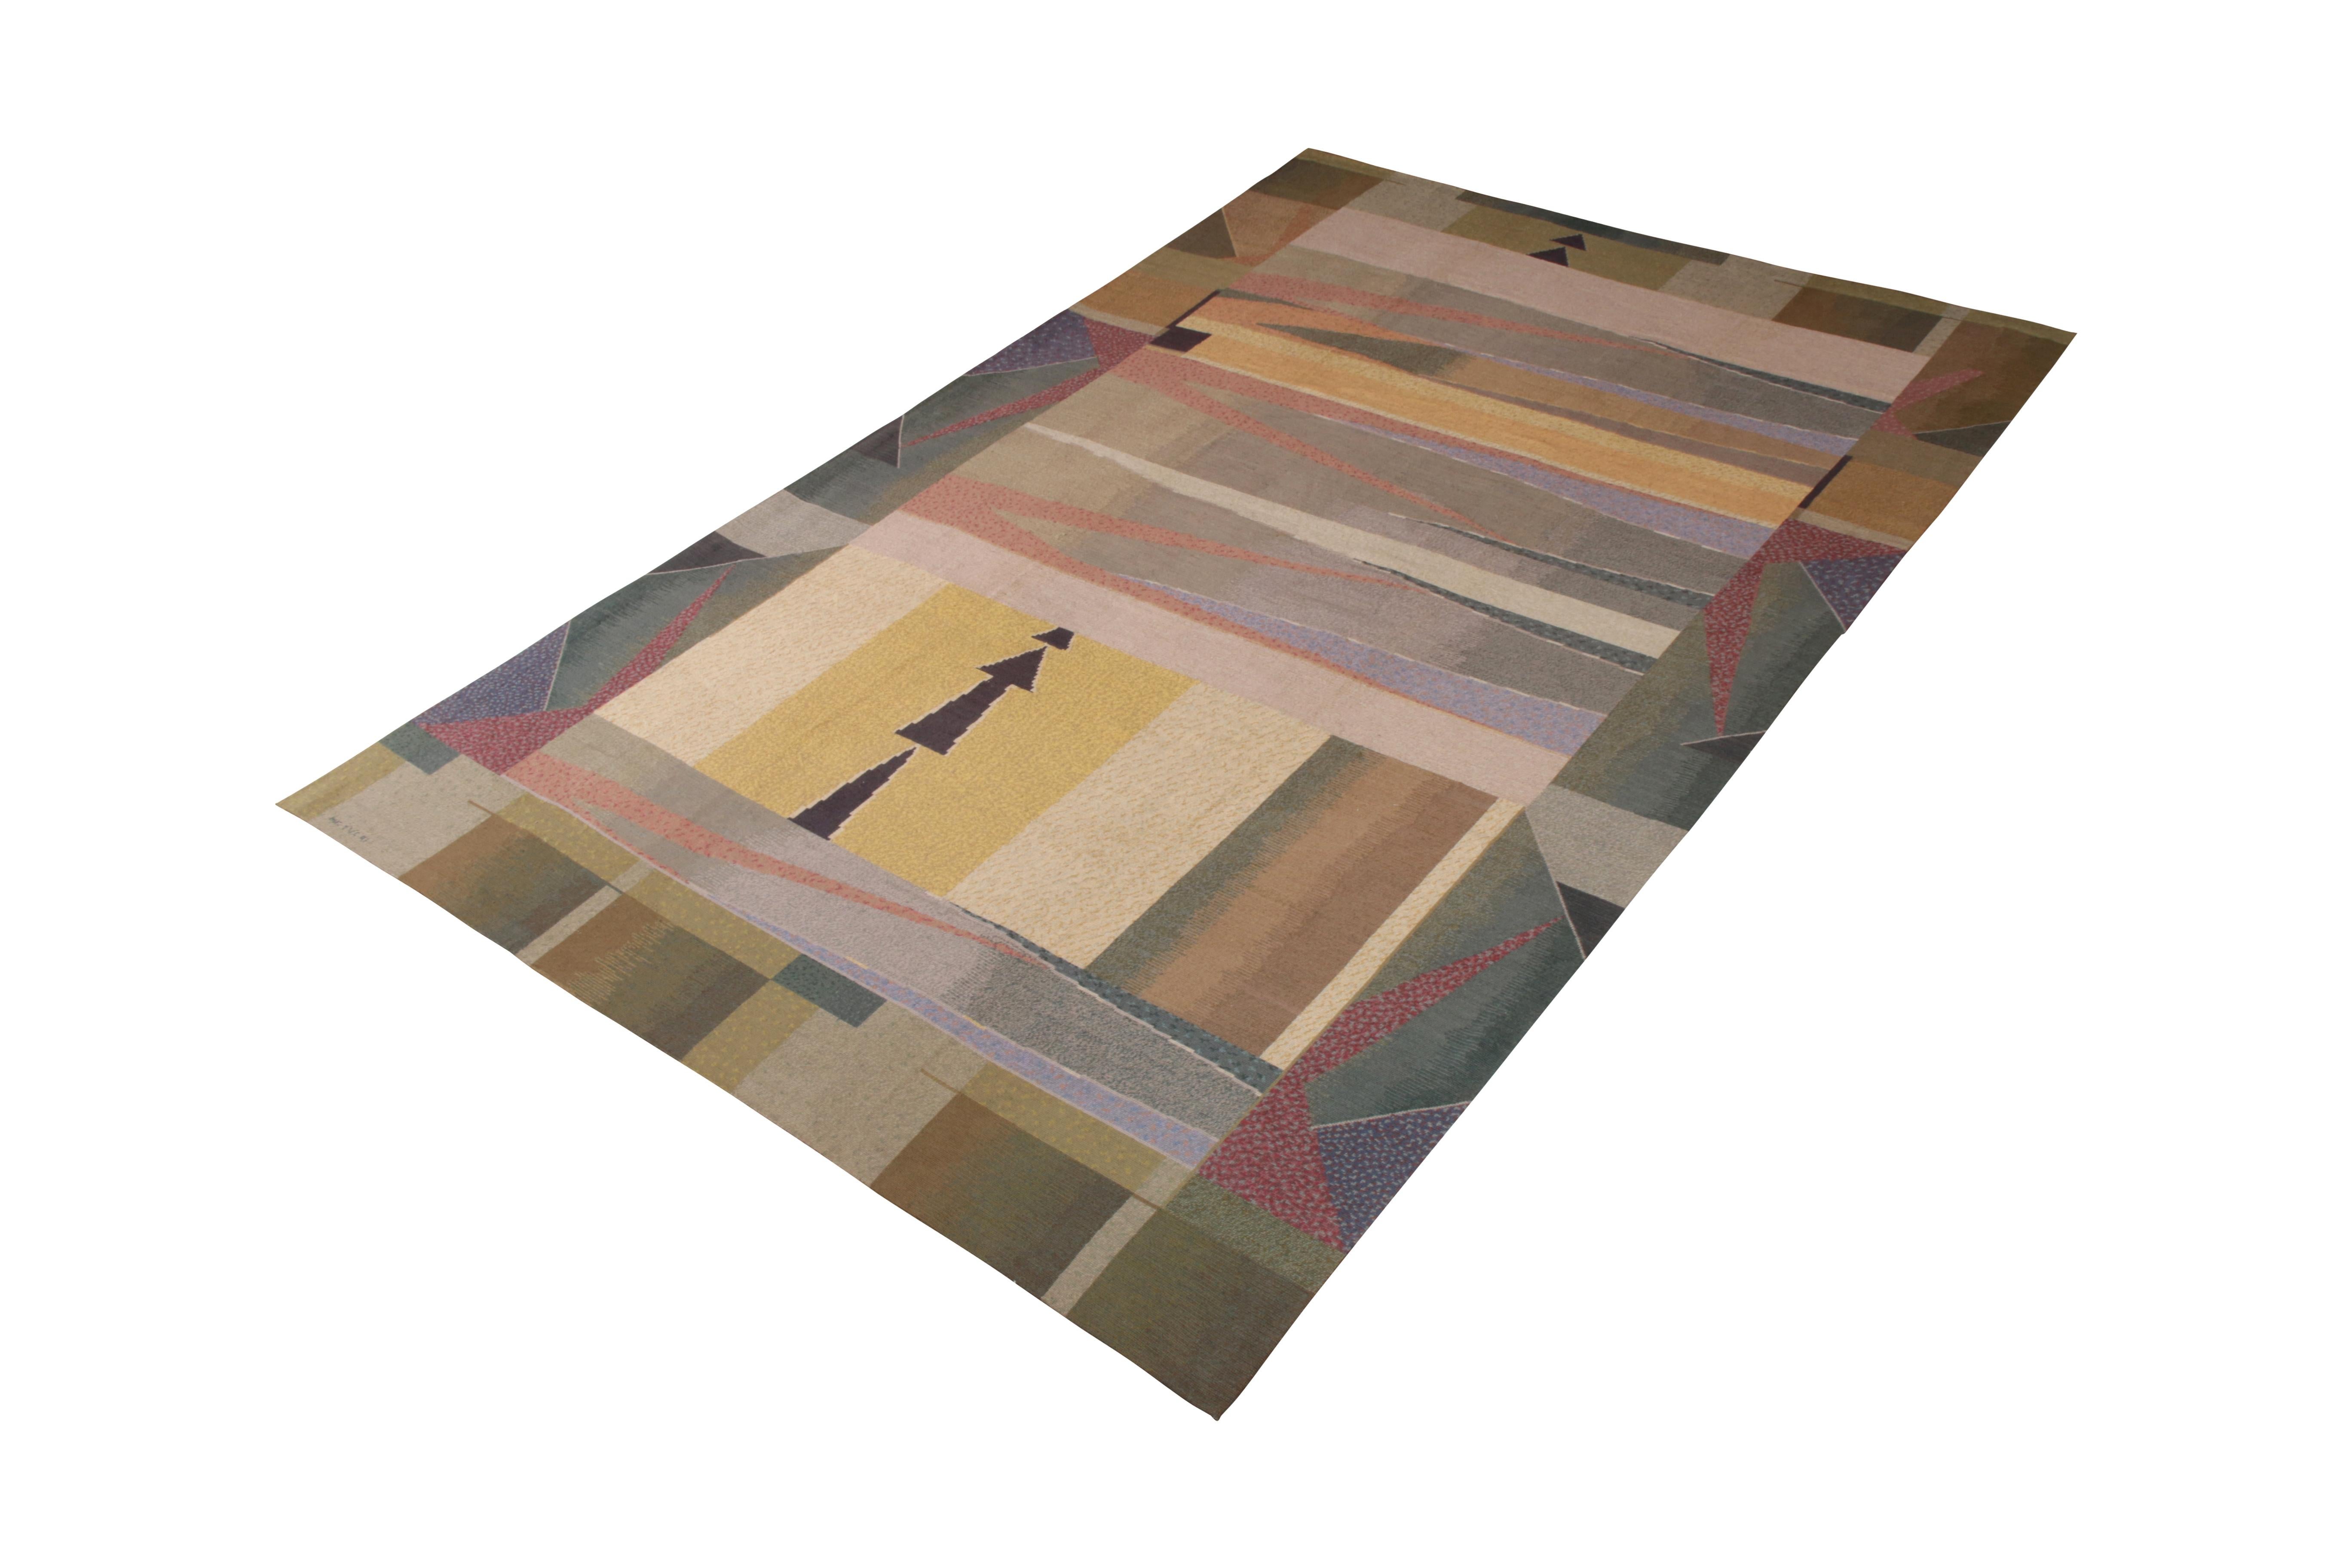 An unveiling from the modern Kilim selections in the Kilim and flat-weave collection from Rug & Kilim—here celebrating a uniquely spacious 9 x 13 Kilim from the late 20th century works of Teddy Sumner—handmade in a wool flat-weave in this